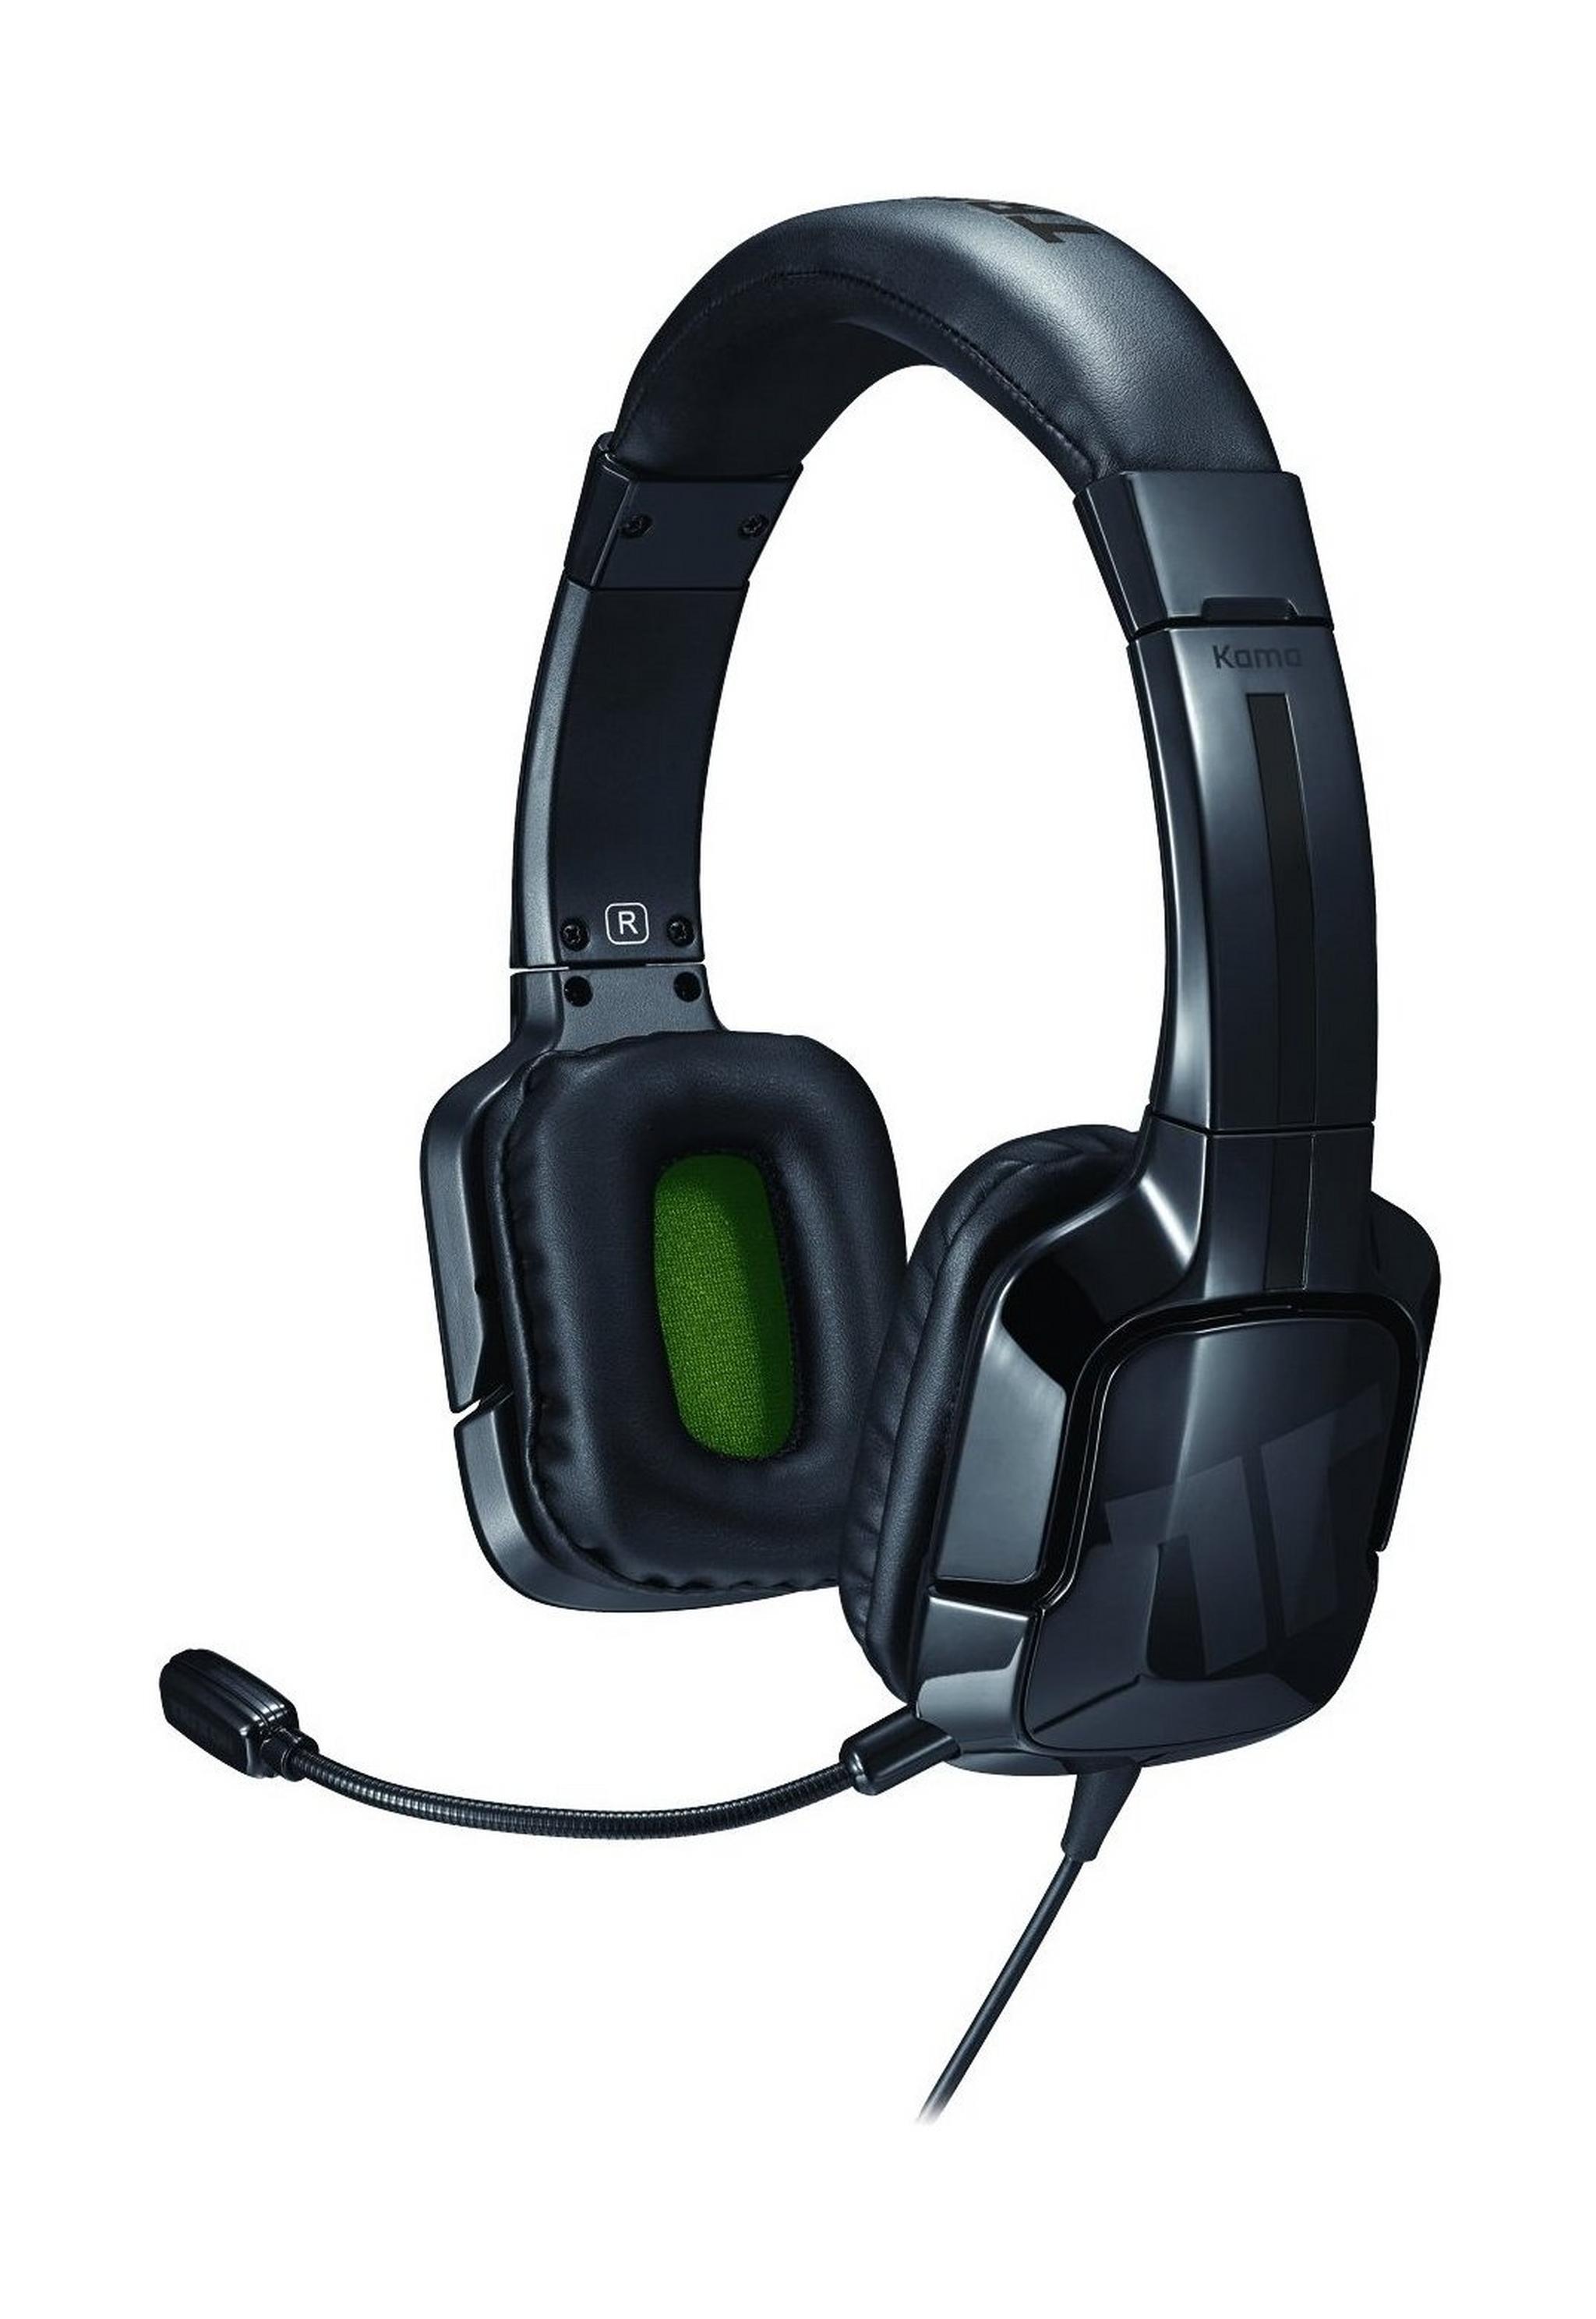 Tritton Kama Stereo Headset for Xbox One and Mobile Devices